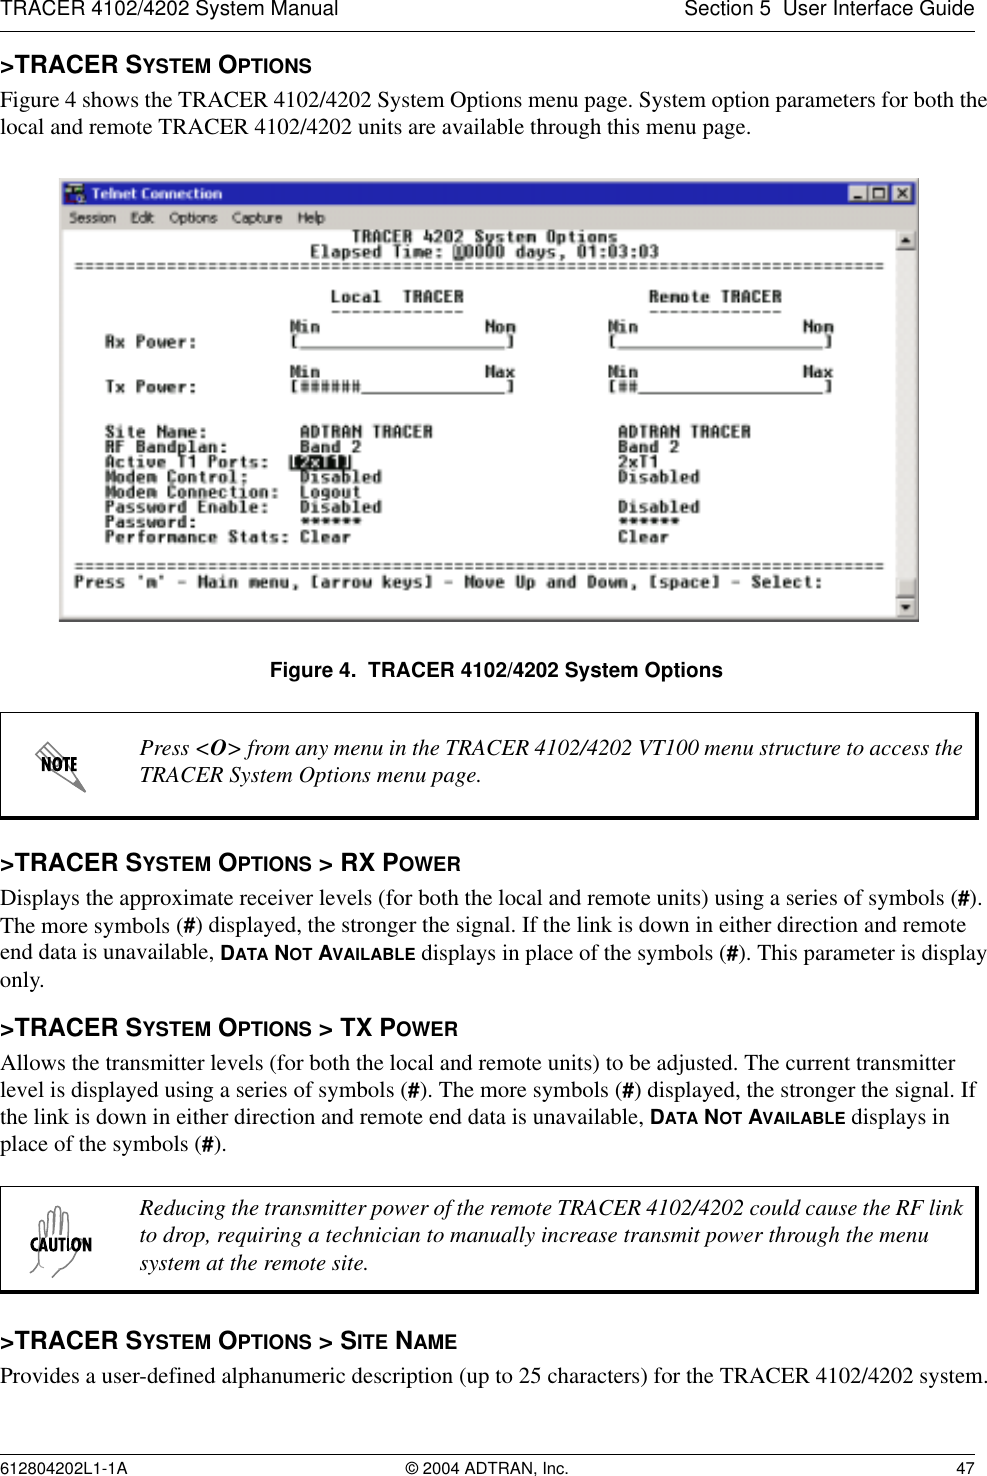 TRACER 4102/4202 System Manual Section 5  User Interface Guide612804202L1-1A © 2004 ADTRAN, Inc. 47&gt;TRACER SYSTEM OPTIONSFigure 4 shows the TRACER 4102/4202 System Options menu page. System option parameters for both the local and remote TRACER 4102/4202 units are available through this menu page.Figure 4.  TRACER 4102/4202 System Options&gt;TRACER SYSTEM OPTIONS &gt; RX POWERDisplays the approximate receiver levels (for both the local and remote units) using a series of symbols (#). The more symbols (#) displayed, the stronger the signal. If the link is down in either direction and remote end data is unavailable, DATA NOT AVAILABLE displays in place of the symbols (#). This parameter is display only.&gt;TRACER SYSTEM OPTIONS &gt; TX POWERAllows the transmitter levels (for both the local and remote units) to be adjusted. The current transmitter level is displayed using a series of symbols (#). The more symbols (#) displayed, the stronger the signal. If the link is down in either direction and remote end data is unavailable, DATA NOT AVAILABLE displays in place of the symbols (#).&gt;TRACER SYSTEM OPTIONS &gt; SITE NAMEProvides a user-defined alphanumeric description (up to 25 characters) for the TRACER 4102/4202 system.Press &lt;O&gt; from any menu in the TRACER 4102/4202 VT100 menu structure to access the TRACER System Options menu page.Reducing the transmitter power of the remote TRACER 4102/4202 could cause the RF link to drop, requiring a technician to manually increase transmit power through the menu system at the remote site.